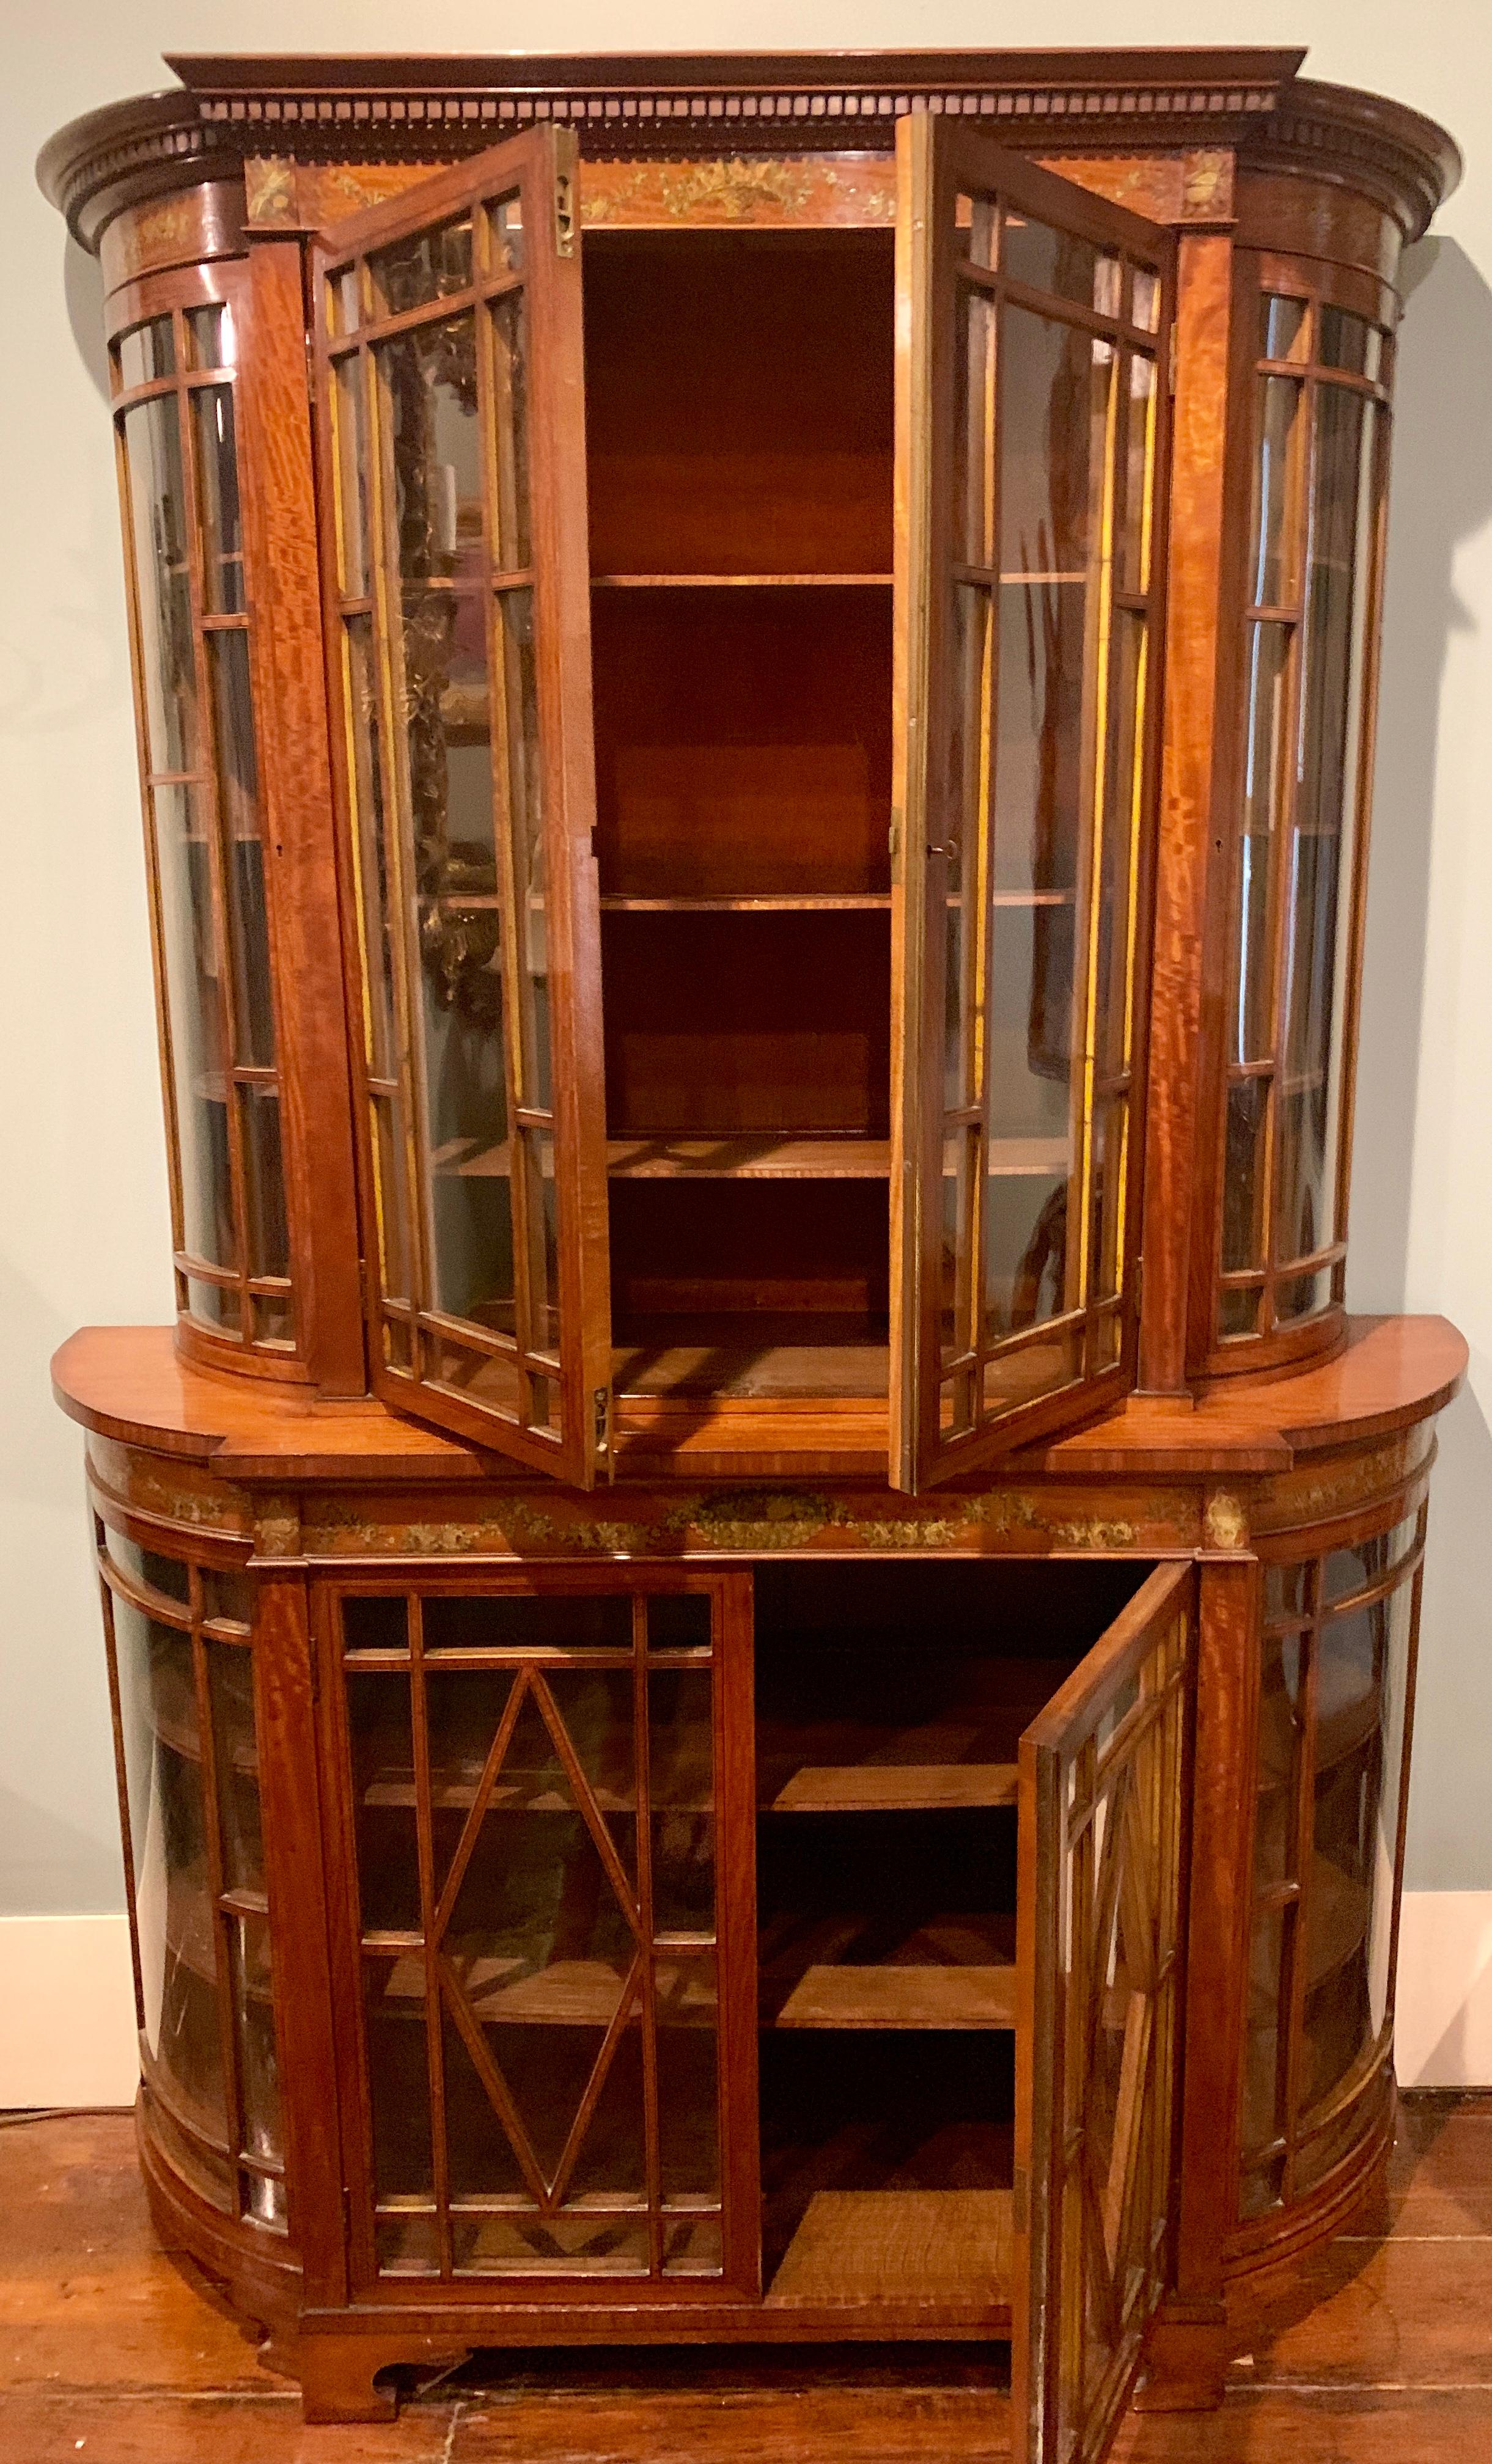 This display cabinet is graced with delicate hand painting. There is plenty of room for displaying one's treasures as well. It is a lovely piece of craftsmanship.
